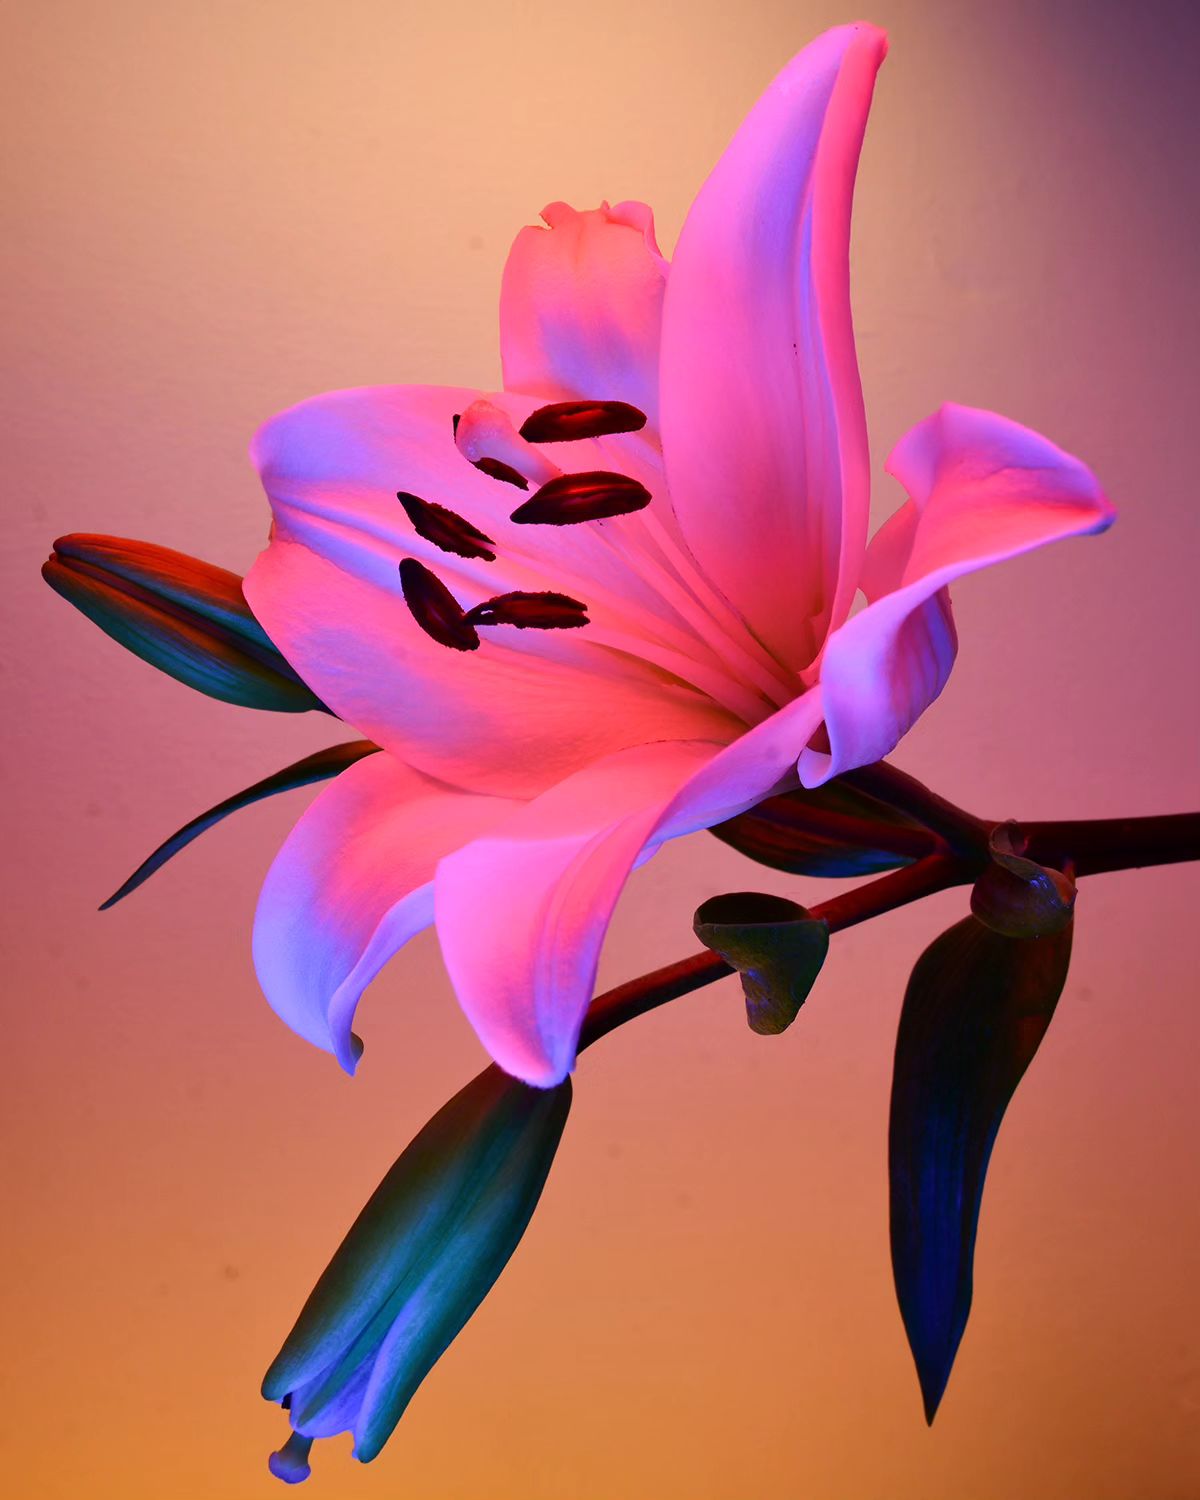 Deflowered, A Floral Photography Series By William Josephs Radford (4)